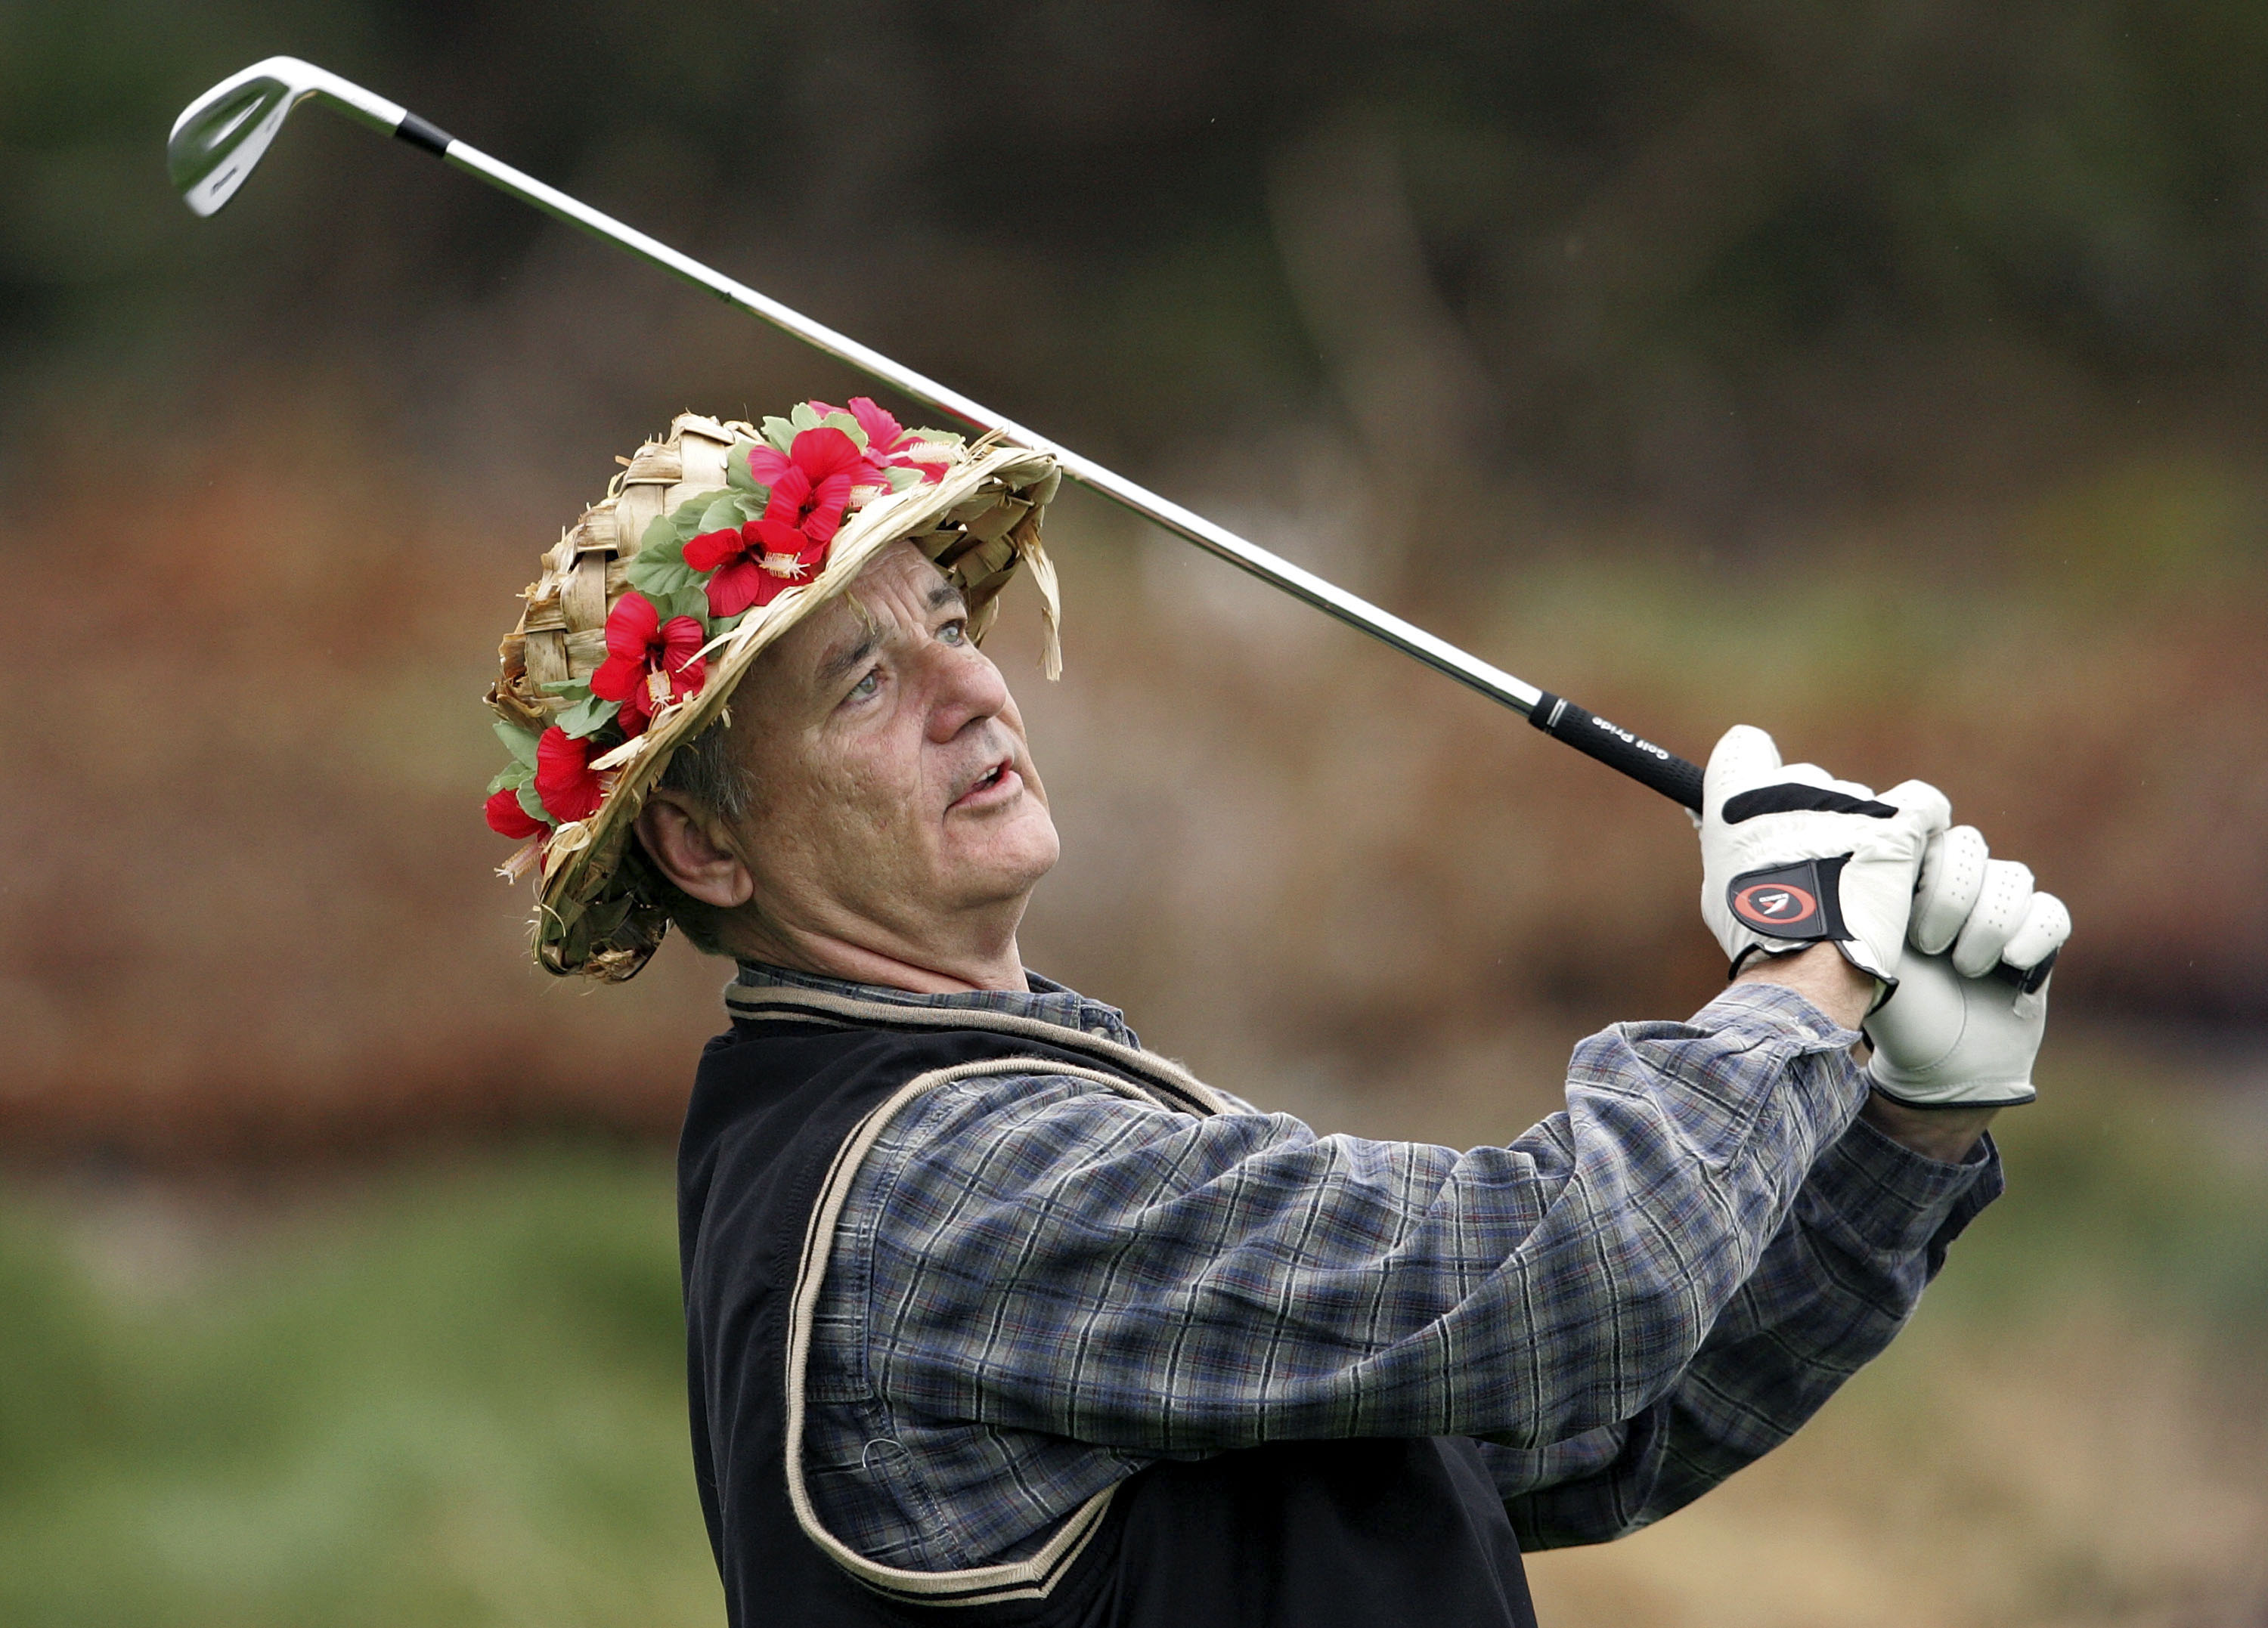 Want to play golf with Bill Murray? Here's your chance